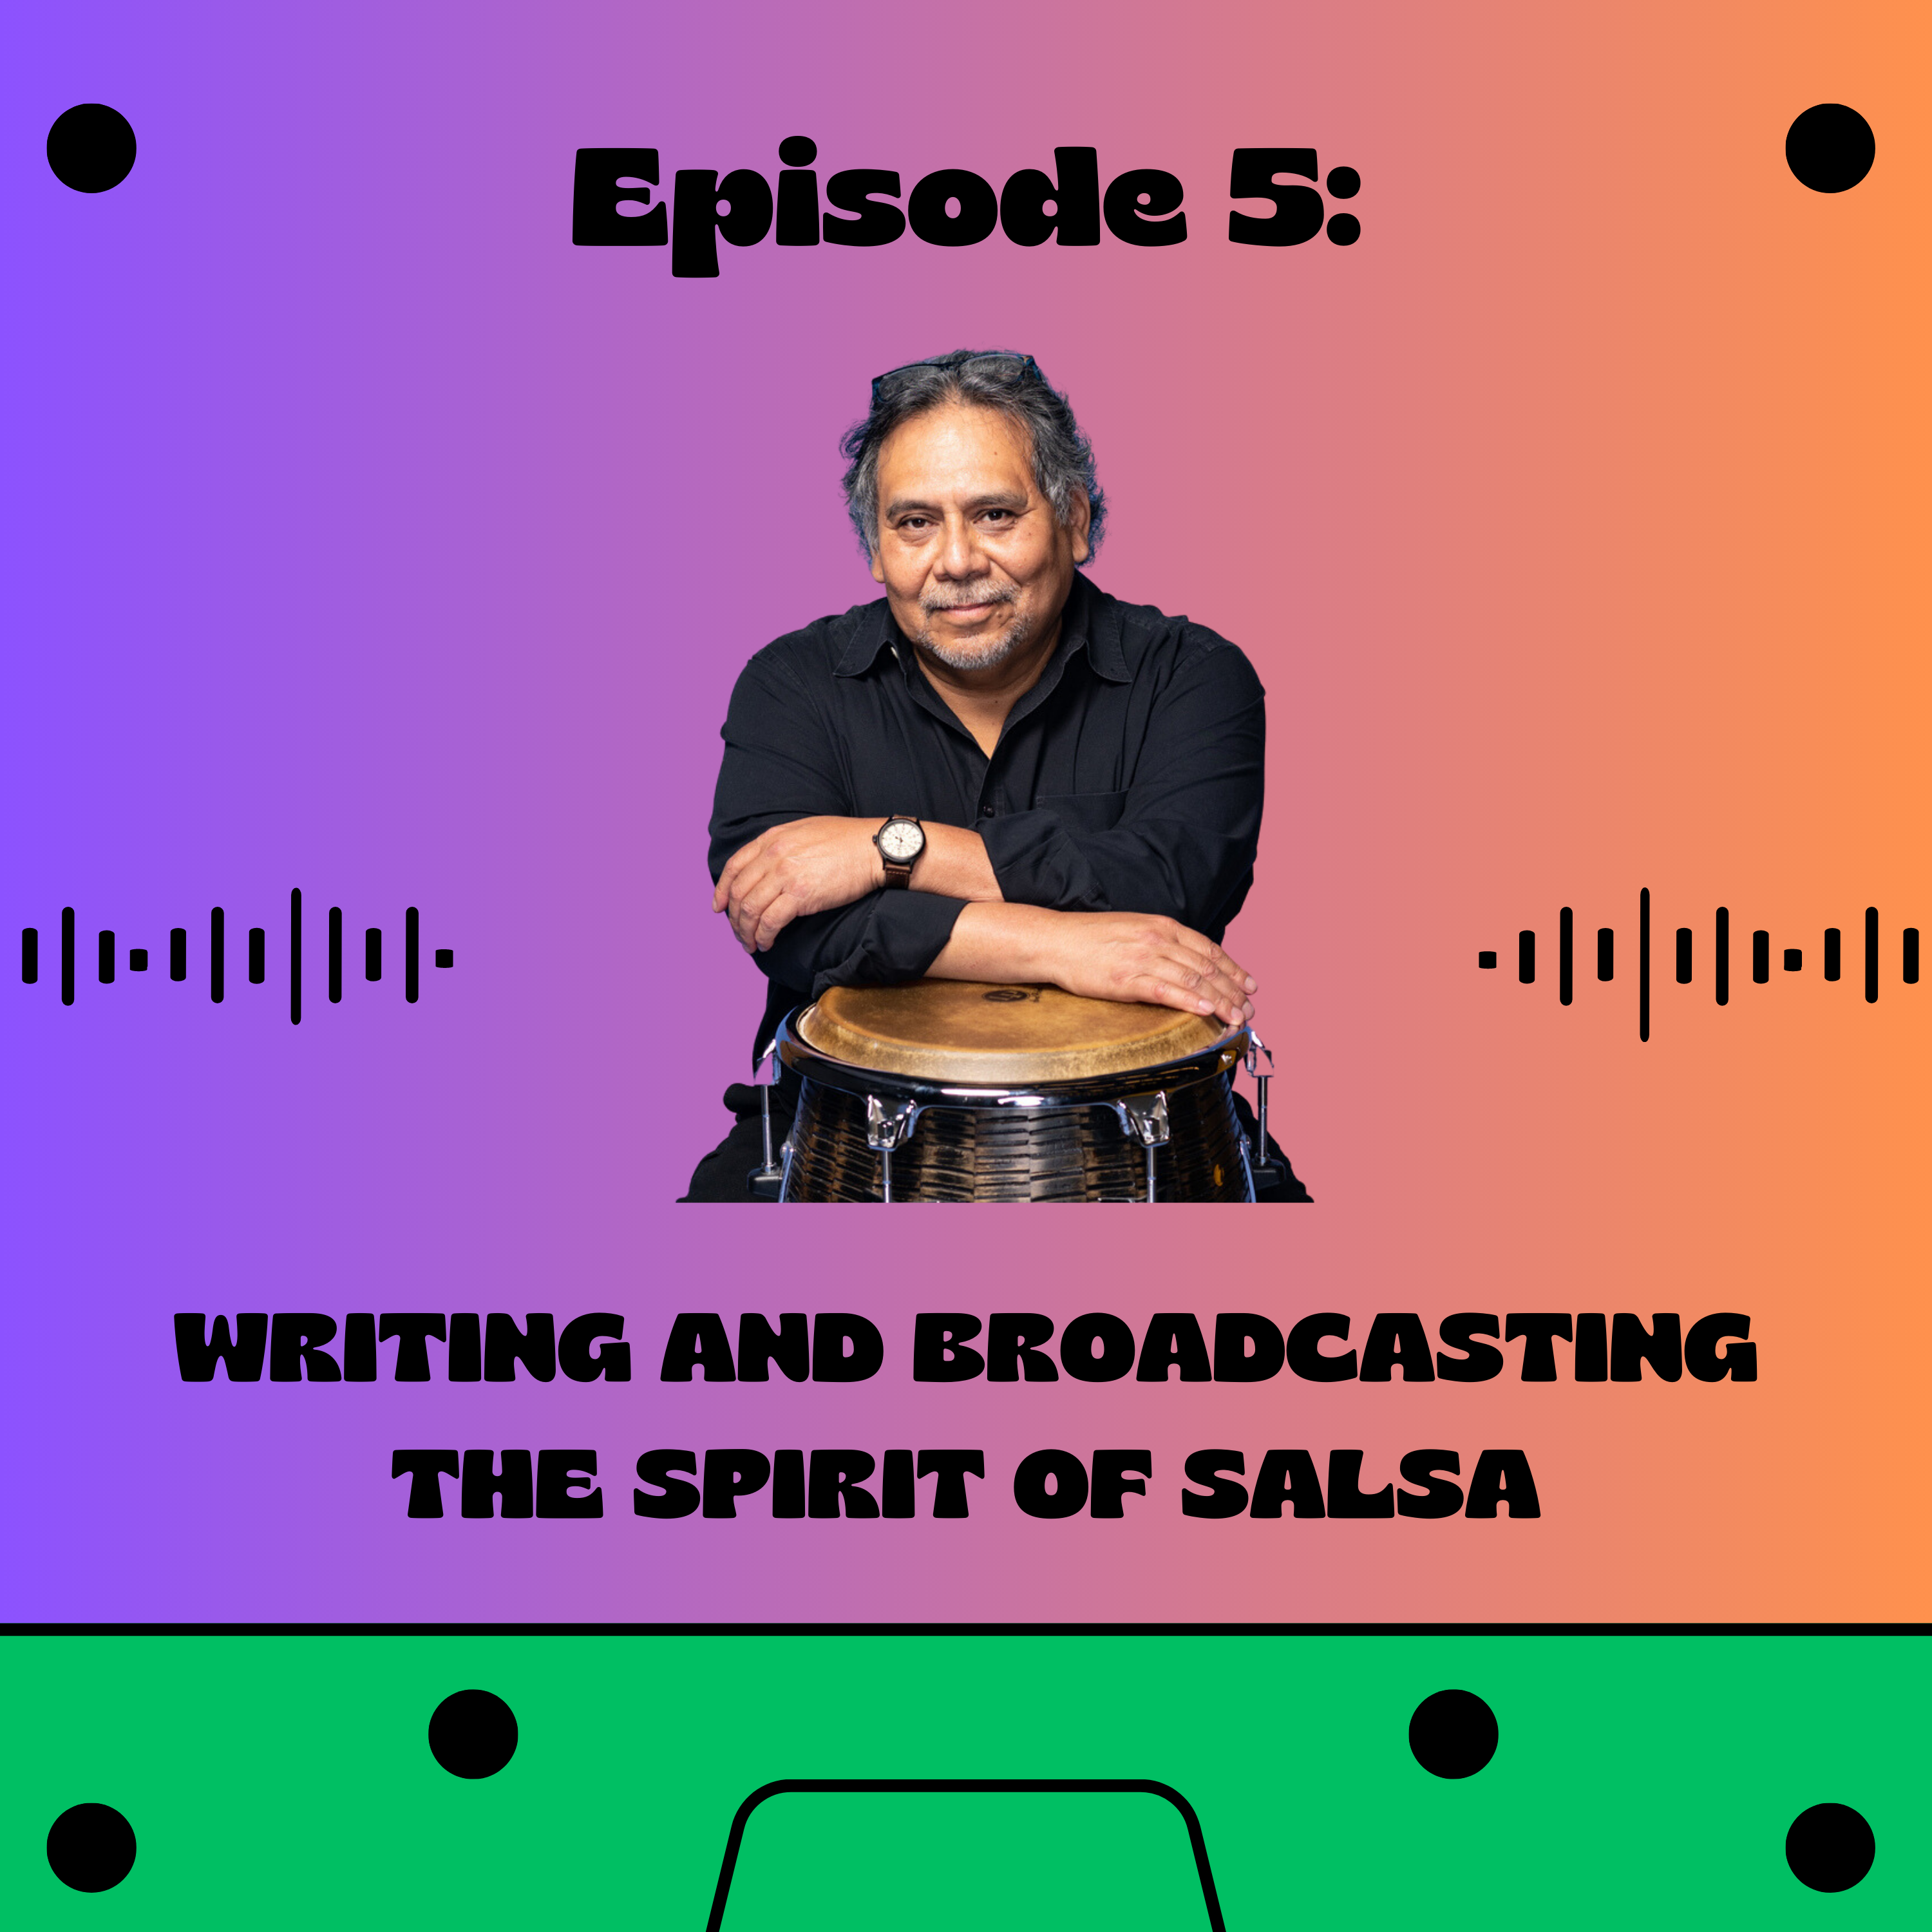 The cover for Episode 5 of the Oíste? Podcast series. The text on the photo reads Oíste? Podcast Writing and Broadcasting the Spirit of Salsa. There is a picture of a man leaning on a drum.